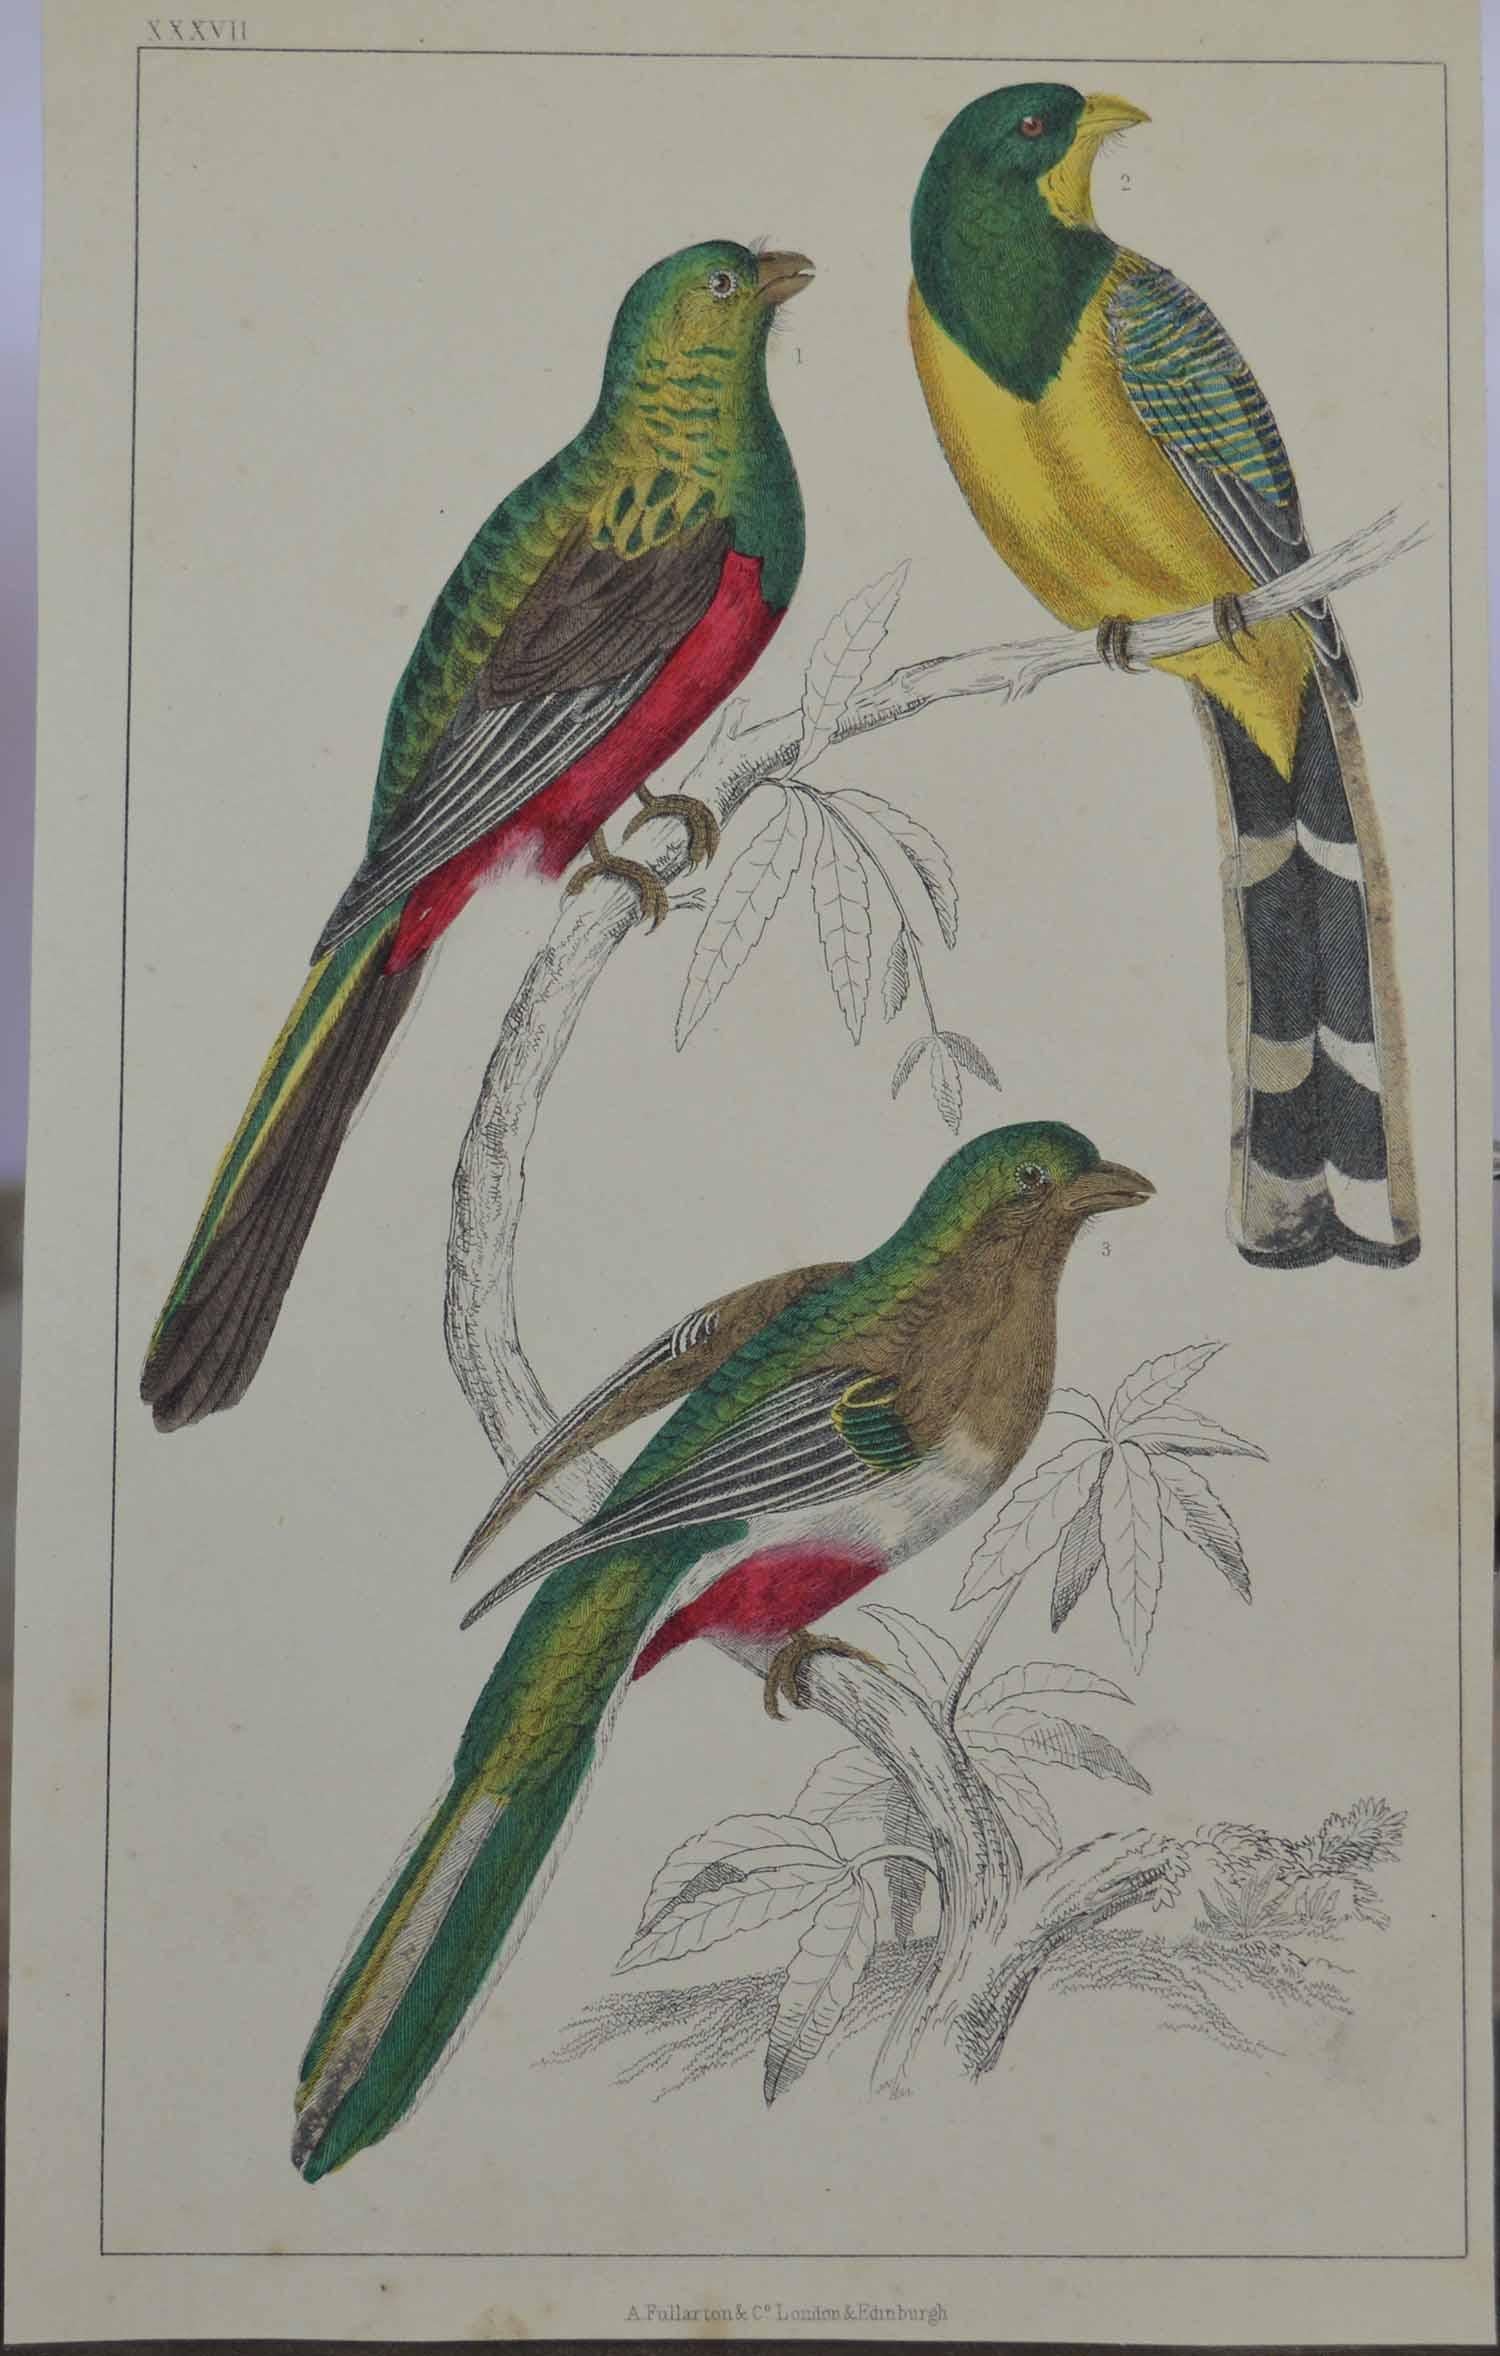 Great image of couroucoui

I have listed several loose natural history prints in the same series.

Unframed. It gives you the option of perhaps making a set up using your own choice of frames.

Lithograph after Cpt. Brown with original hand